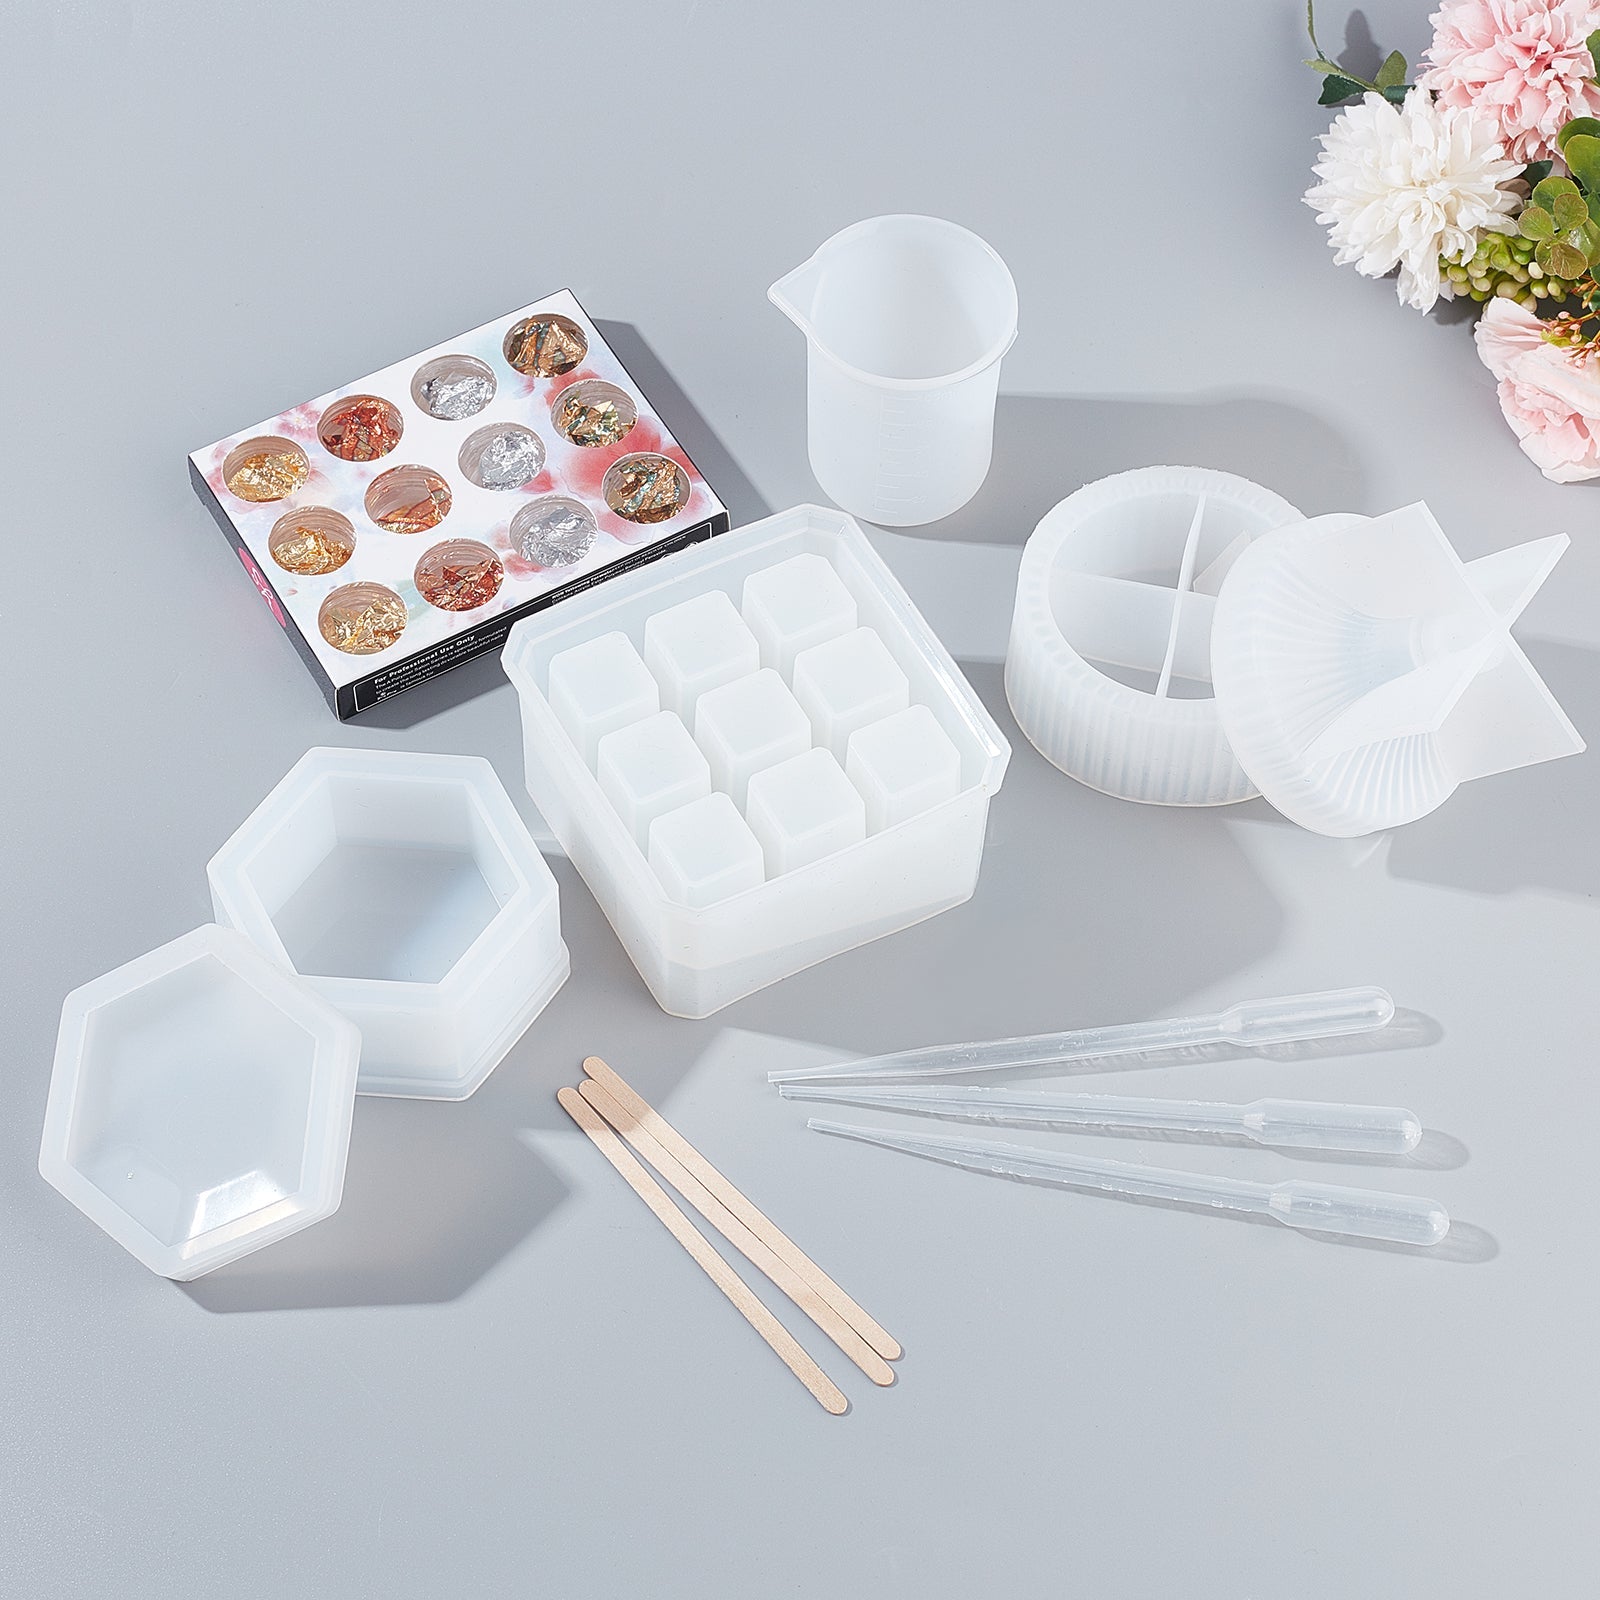 https://www.craspire.com/cdn/shop/products/diy-beauty-makeup-storage-box-epoxy-resin-crafts-kits-with-silicone-storage-box-molds-uv-gel-nail-art-tinfoil-plastic-measuring-cups-transfer-pipettes-pvc-glove-747096.jpg?v=1666924990